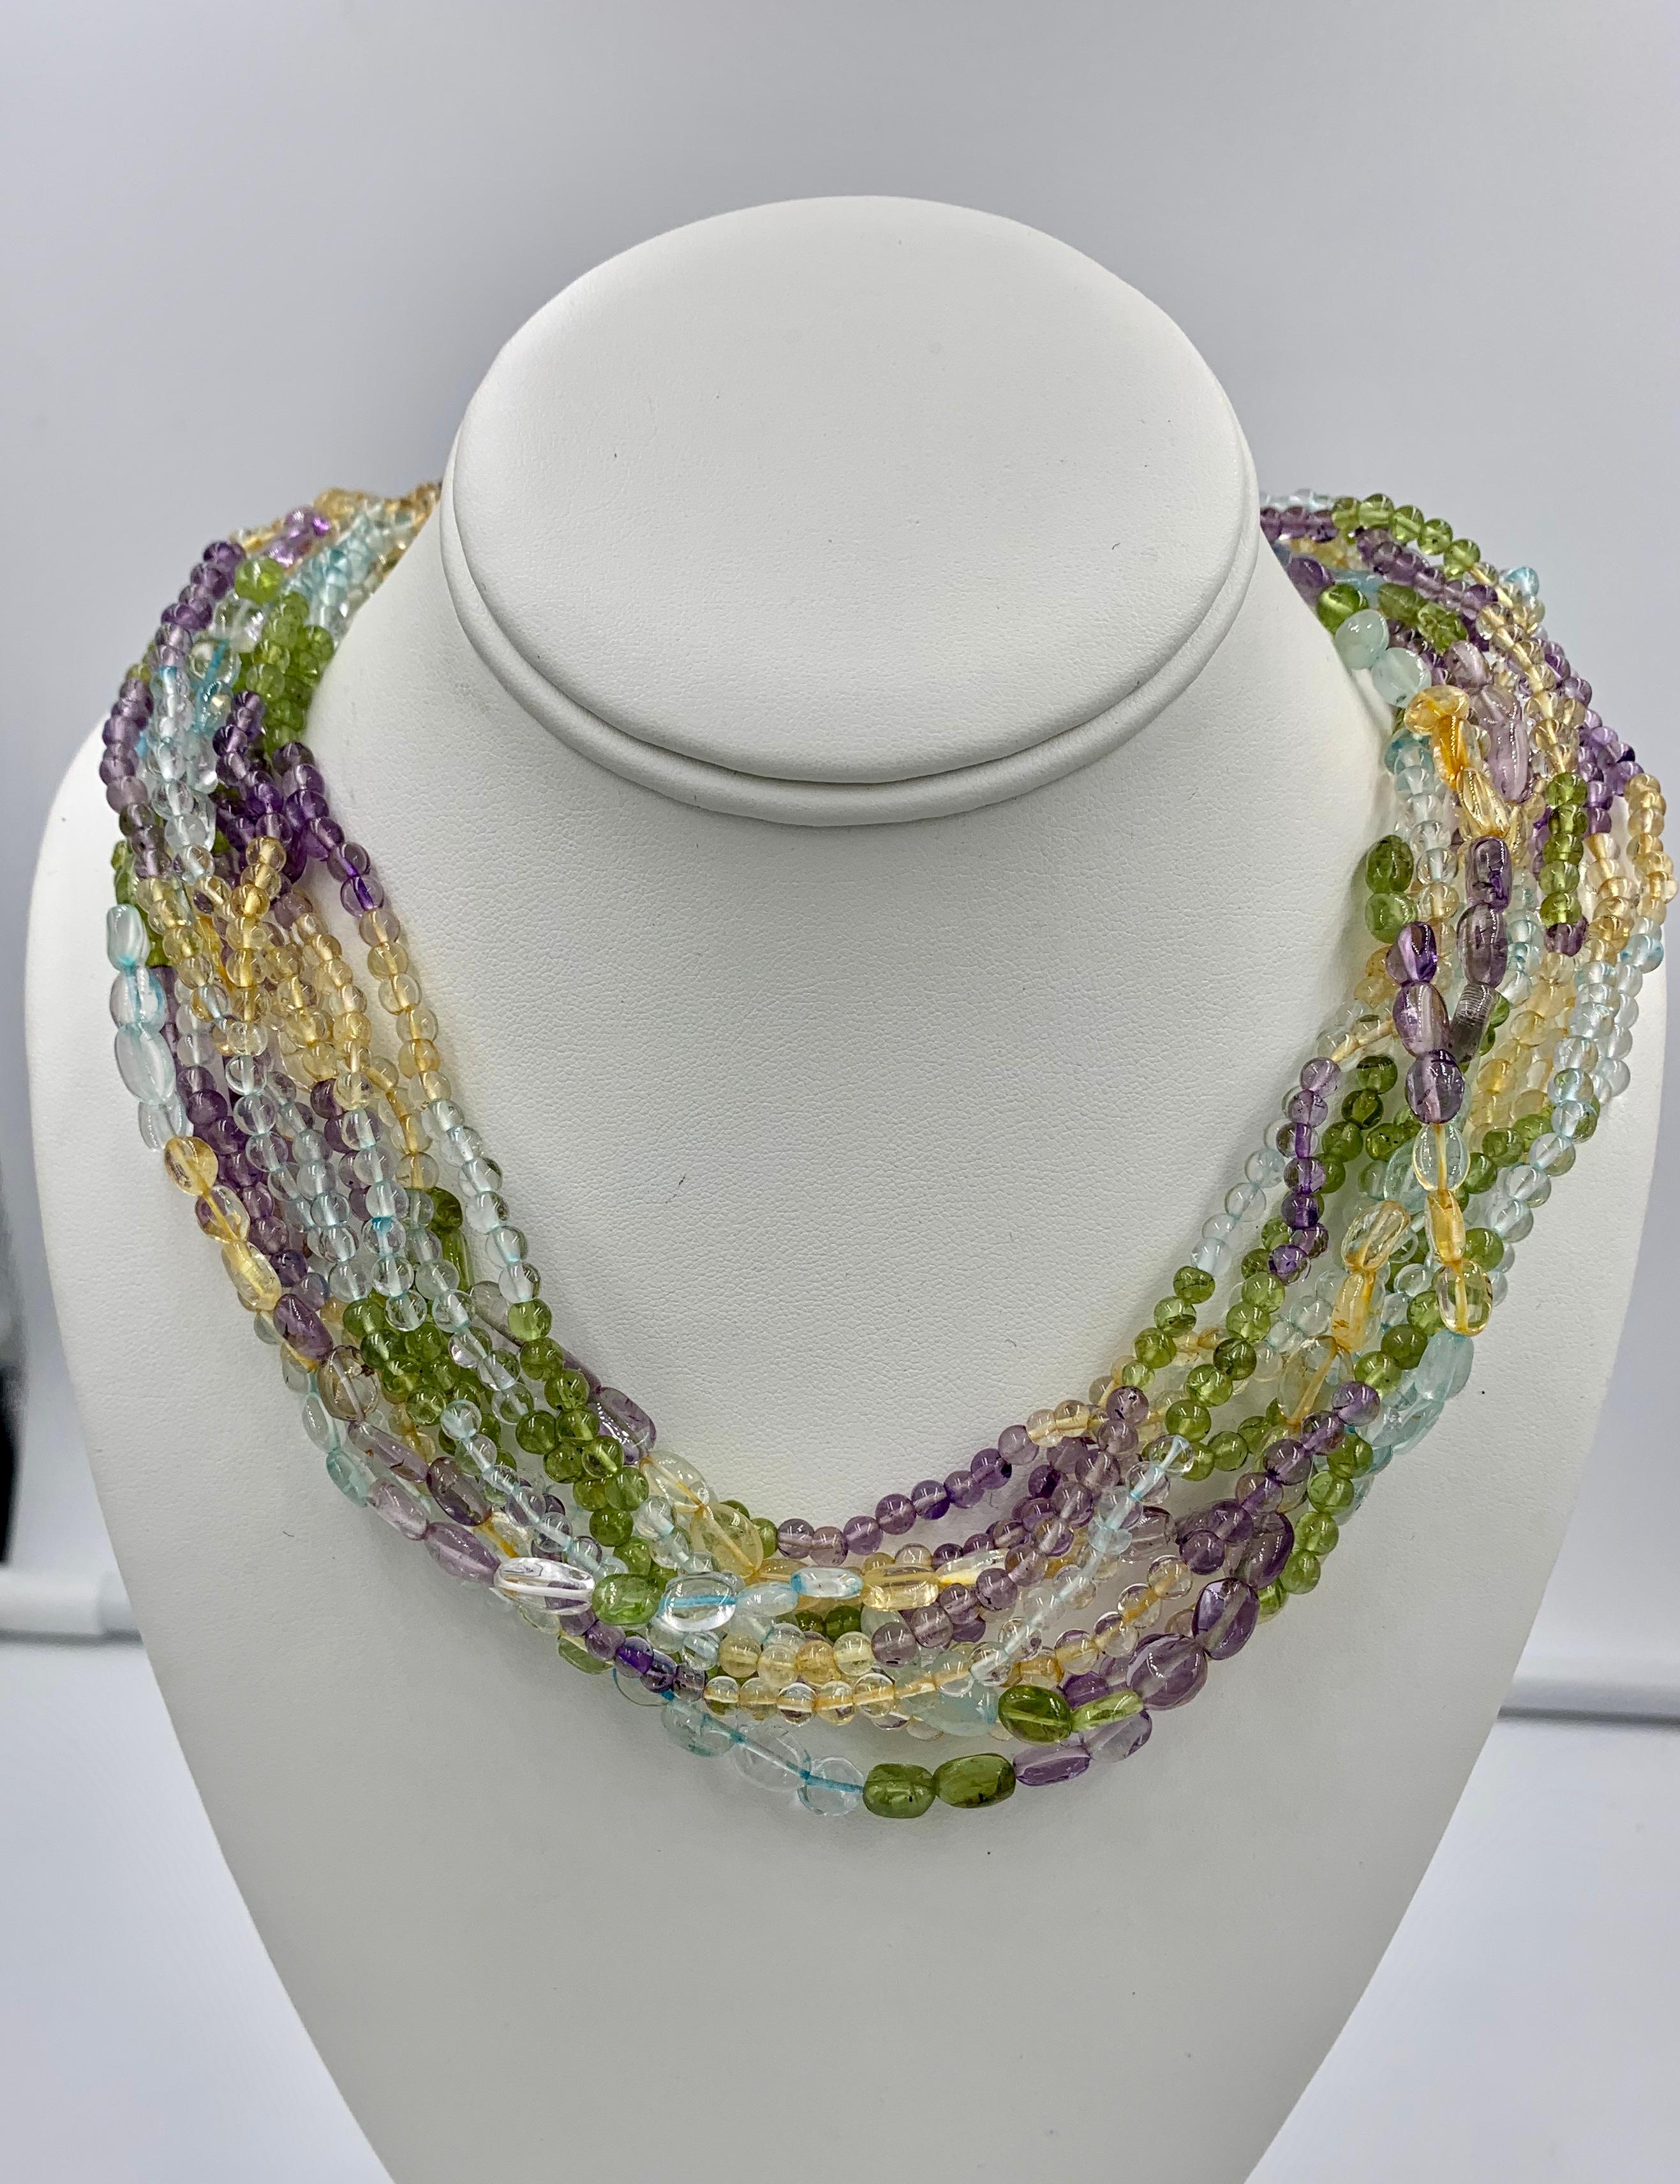 This is a fabulous Multistrand Multicolored Bead Torsade Necklace with eleven strands of amethyst, peridot, citrine & aquamarine beads with a 14 Karat Gold clasp.  The stunning Multi Gem Necklace is set with round and oval Aquamarine, Citrine,